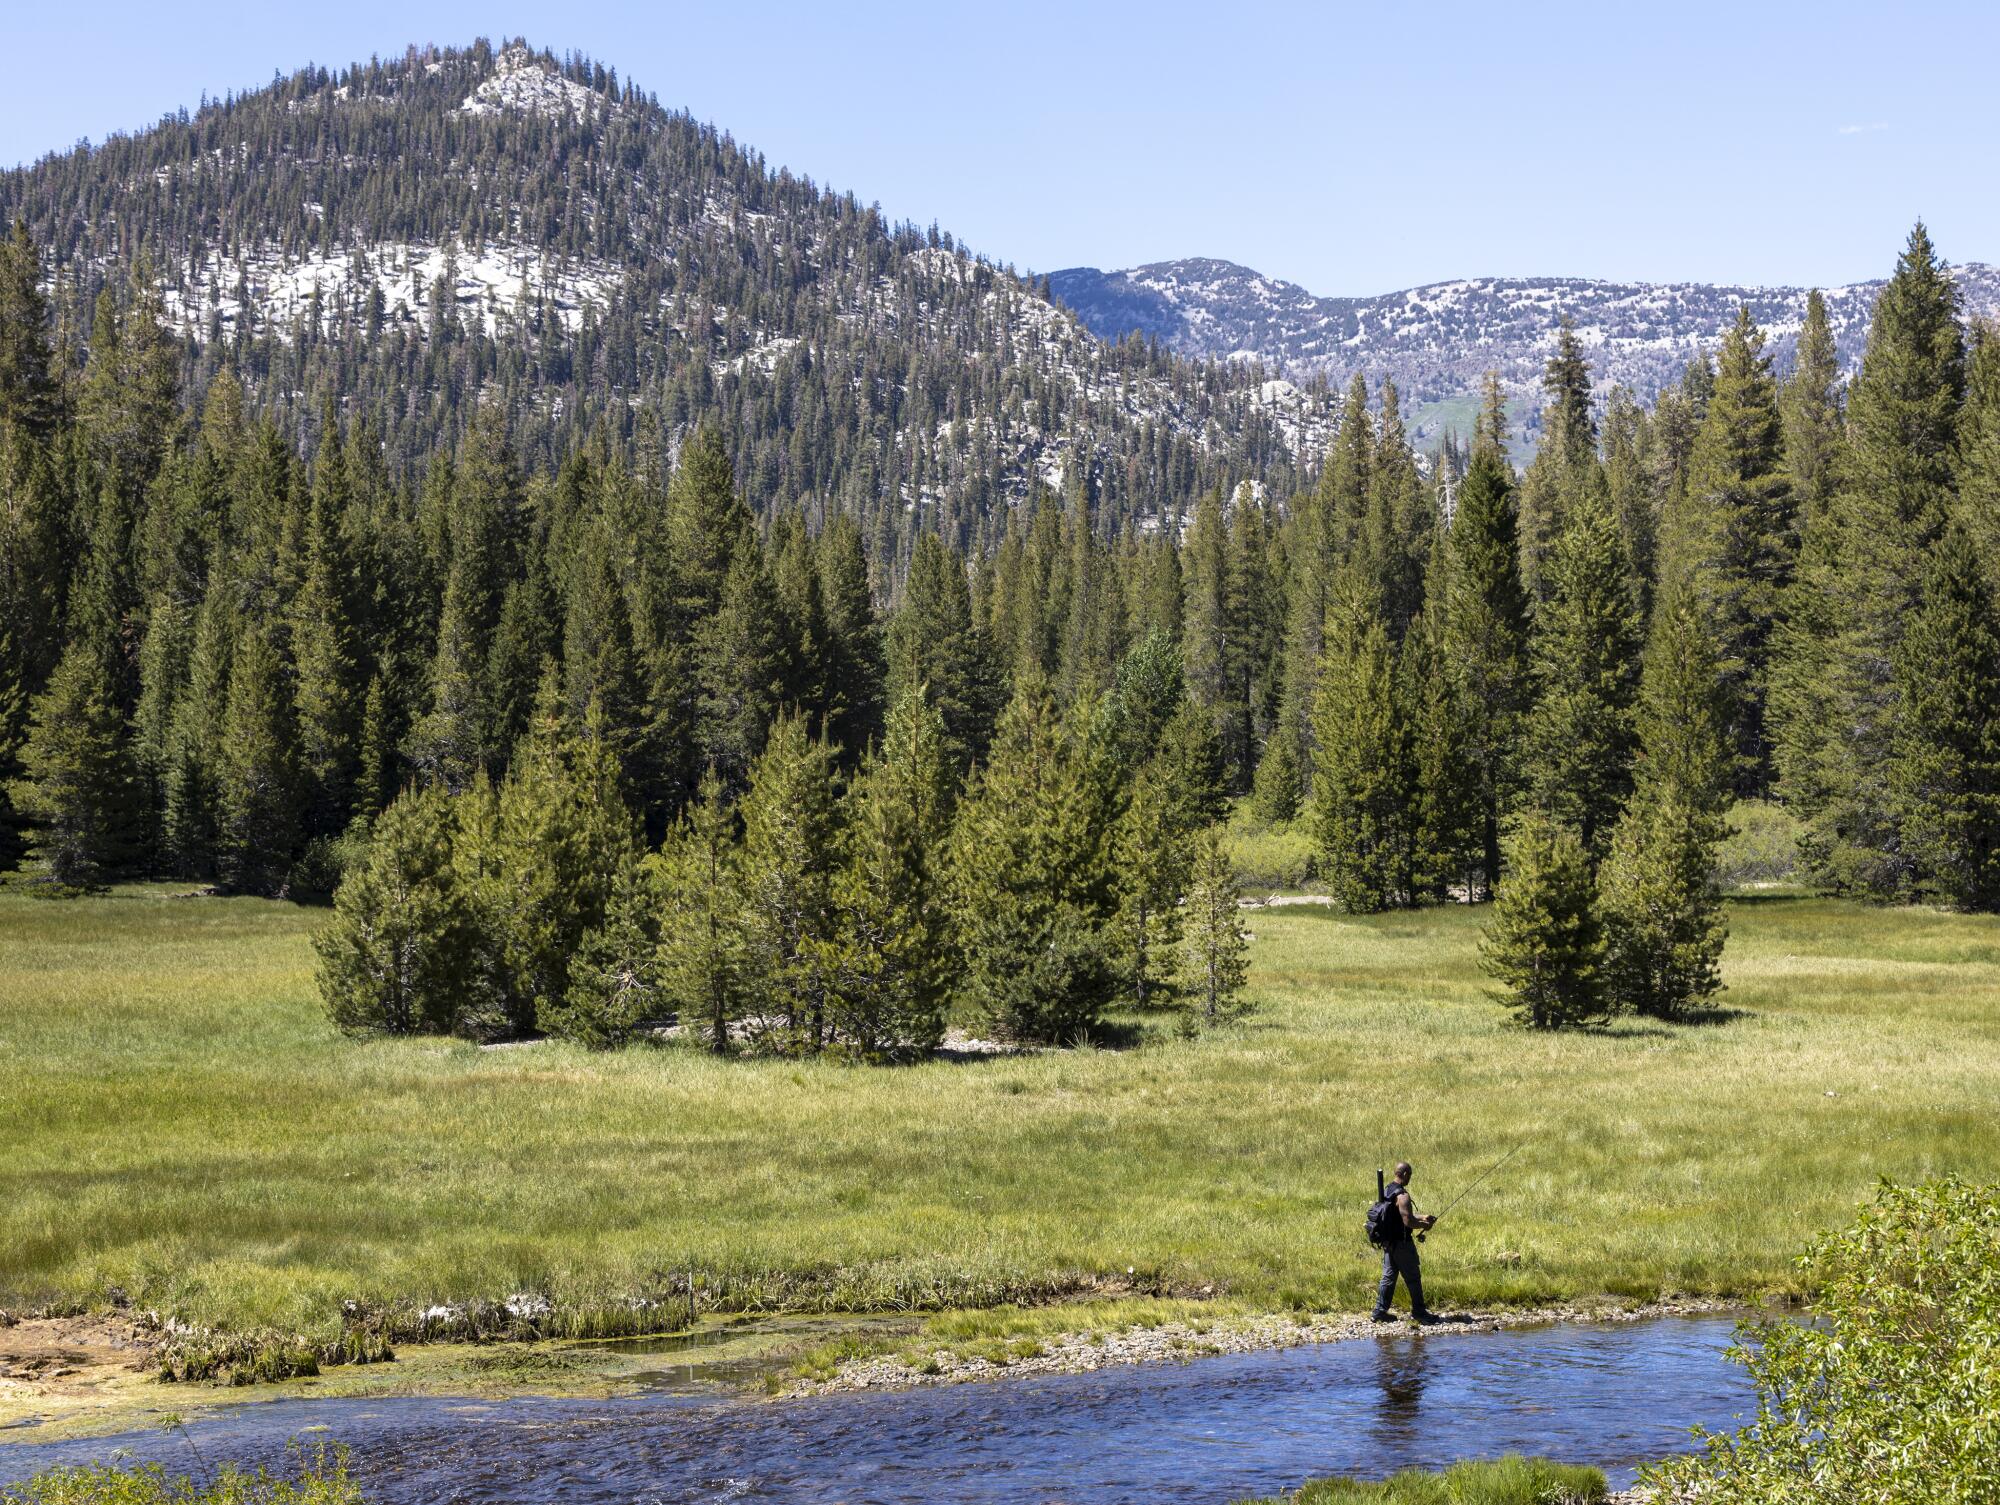 In a meadow, a hiker stands on a river's bank.